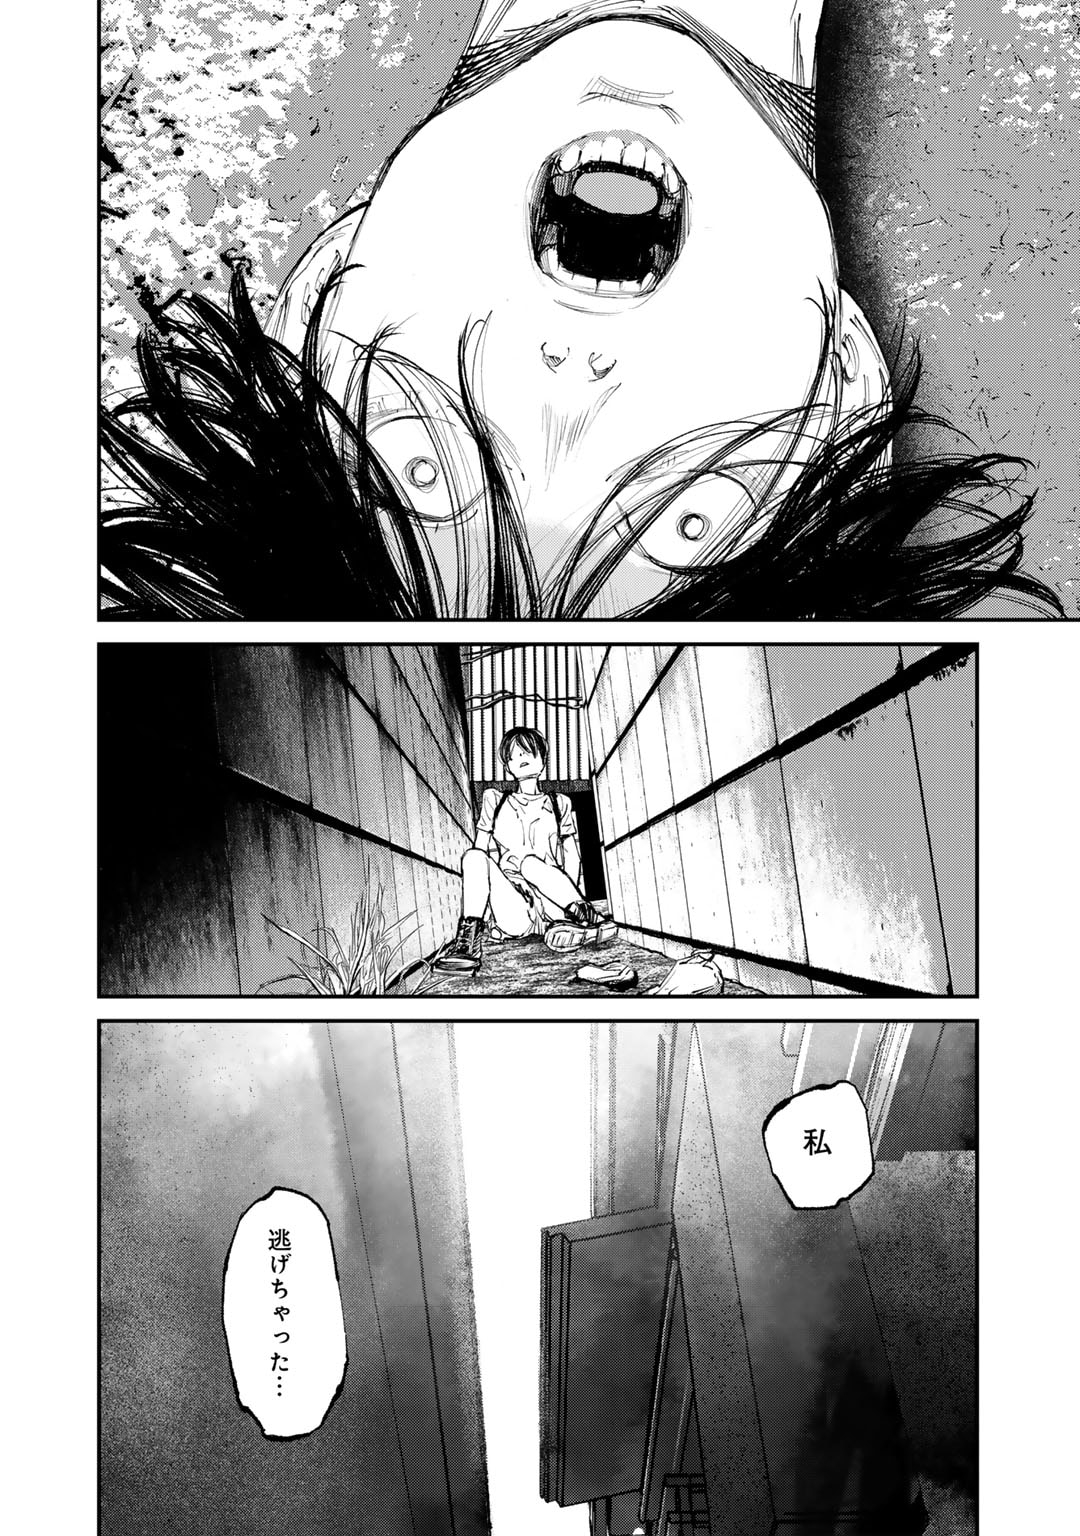 Kanata Is Into More Darker - Chapter 7 - Page 12